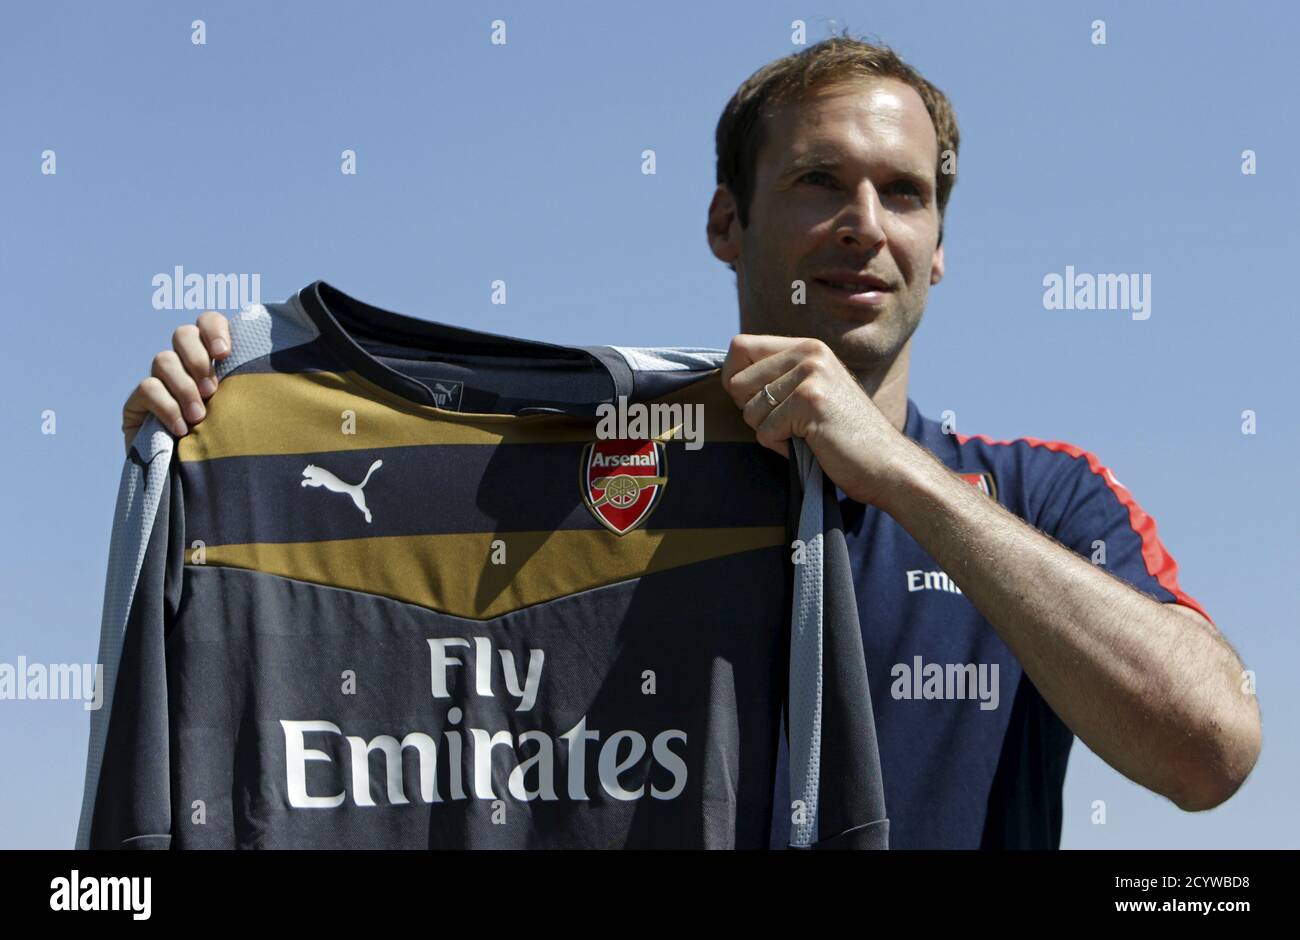 Czech soccer player Petr Cech shows his Arsenal jersey during his  presentation in Prague July 1, 2015. Petr Cech thanked Roman Abramovich  after the Chelsea owner allowed the club's long-serving goalkeeper to